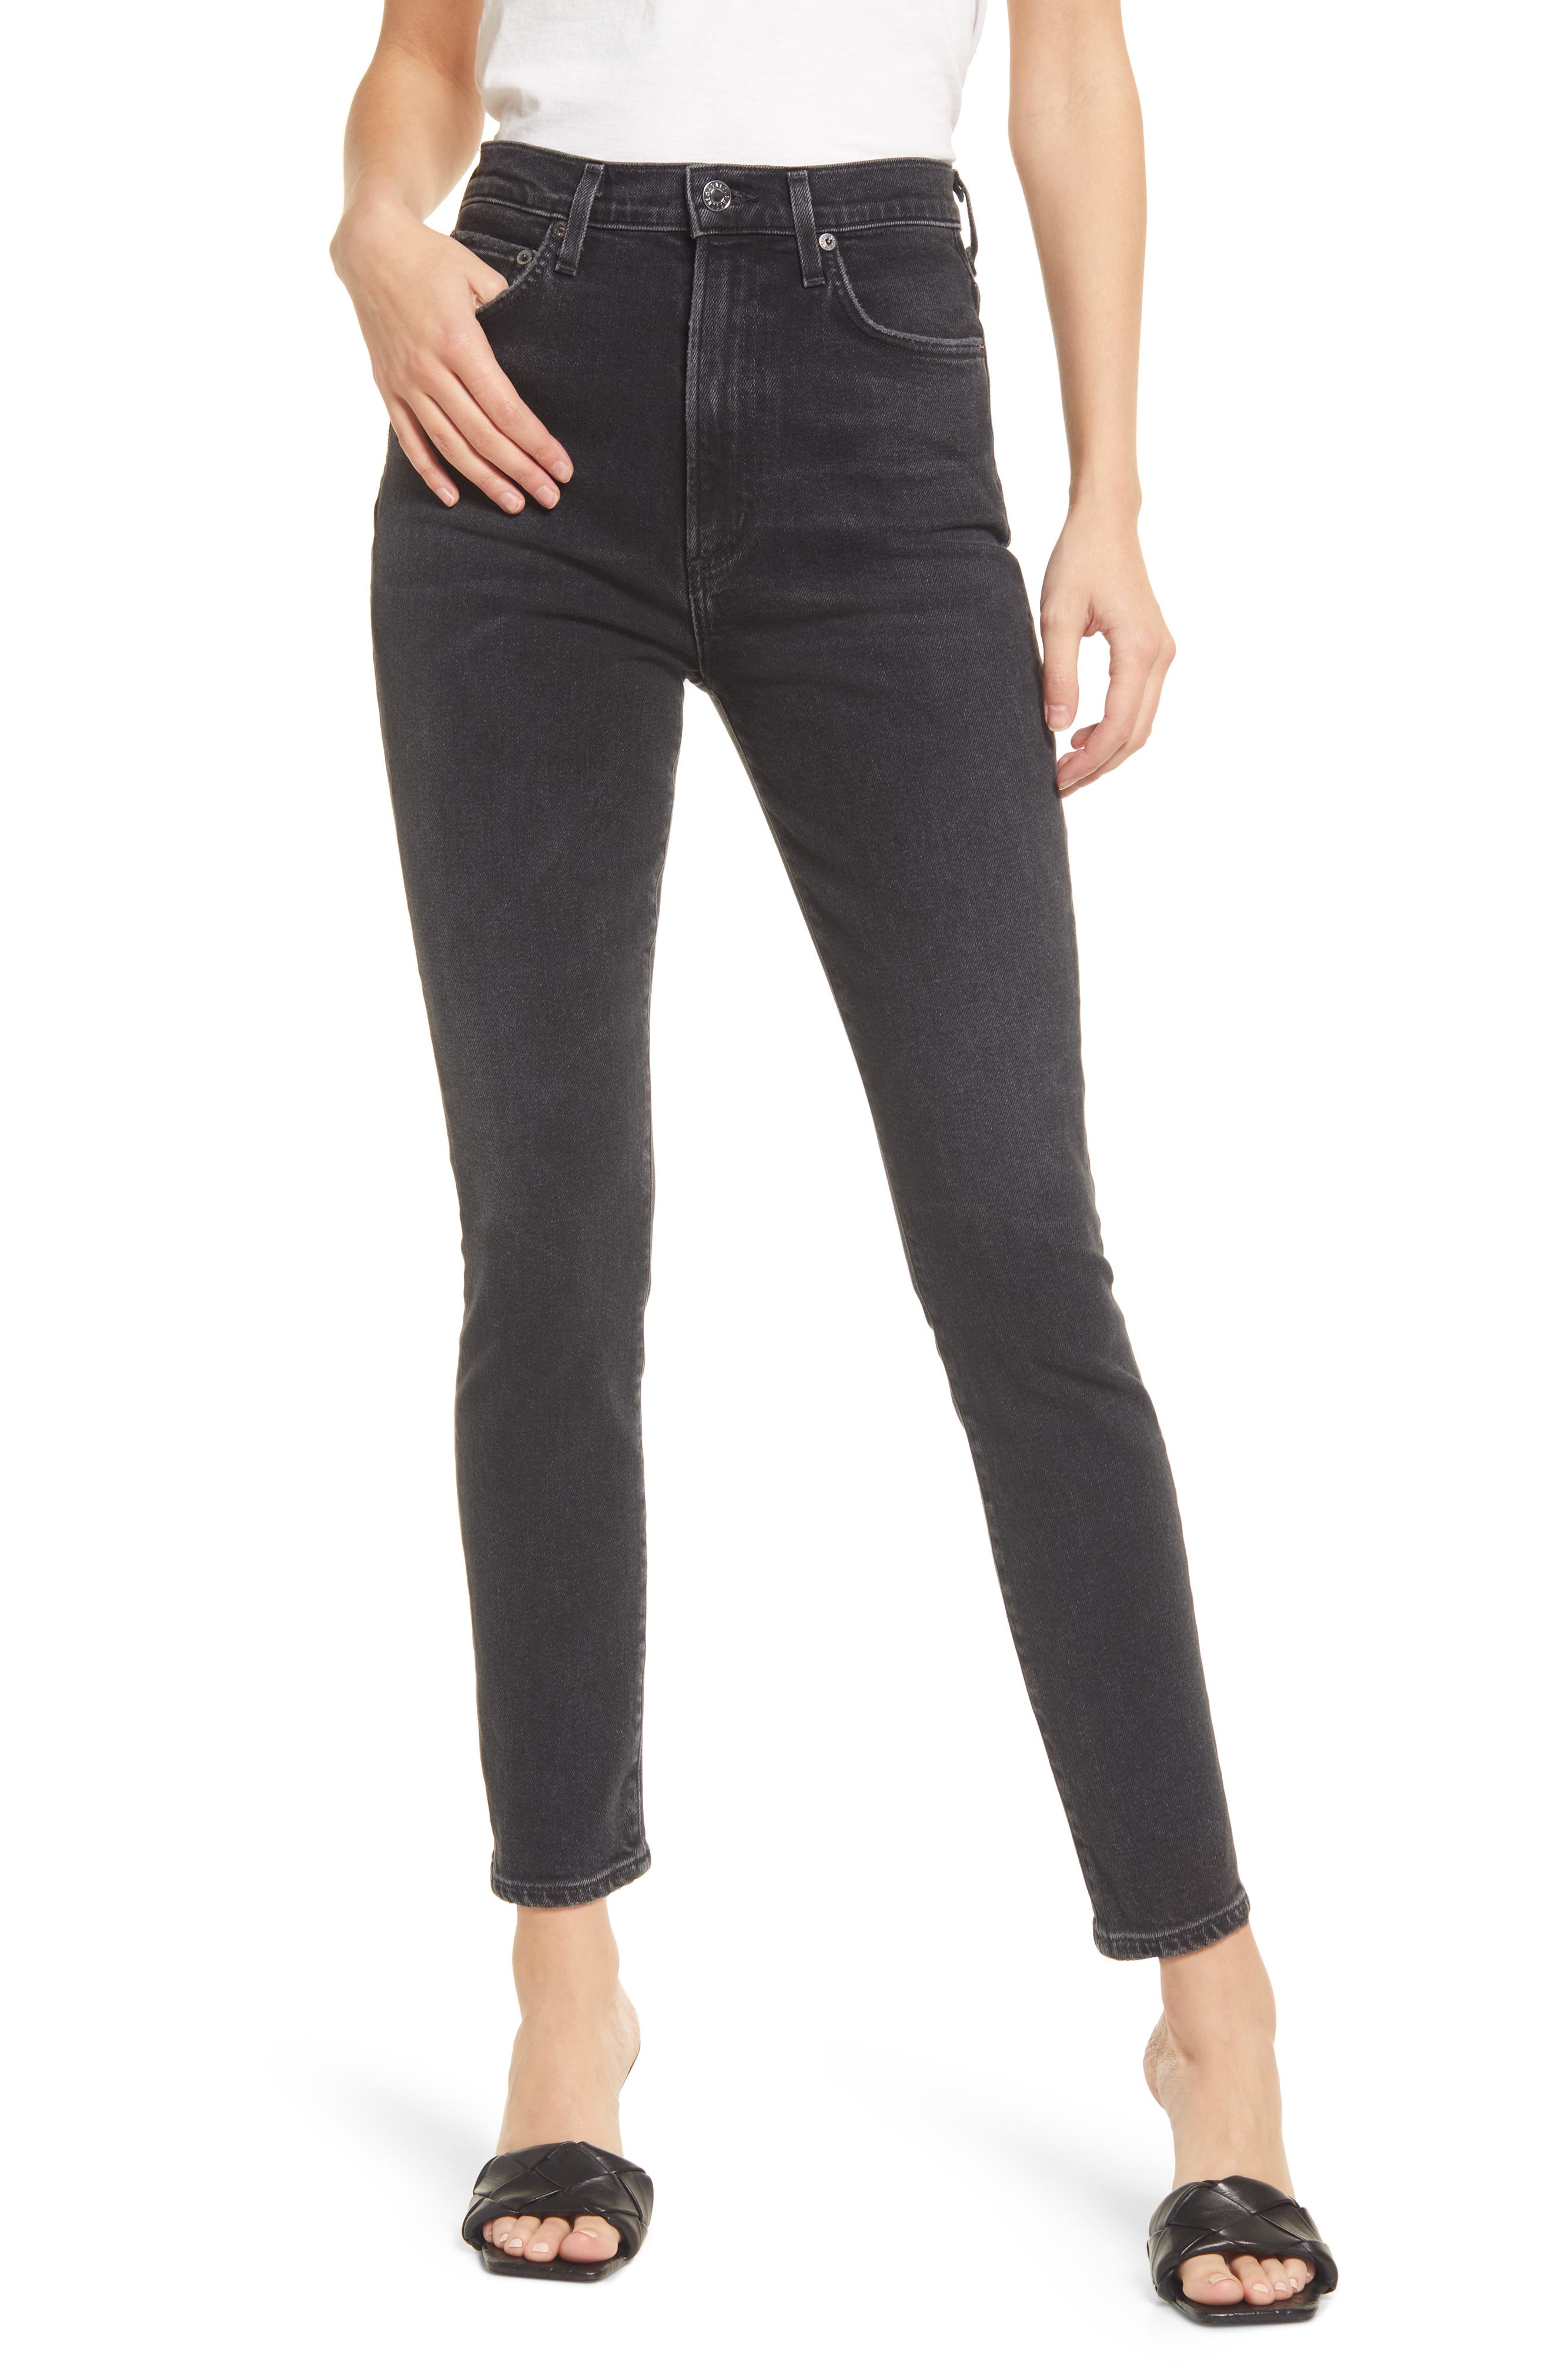 AGOLDE Pinch Waist Super High Waist Organic Cotton Skinny Jeans in Hotline at Nordstrom, Size 29